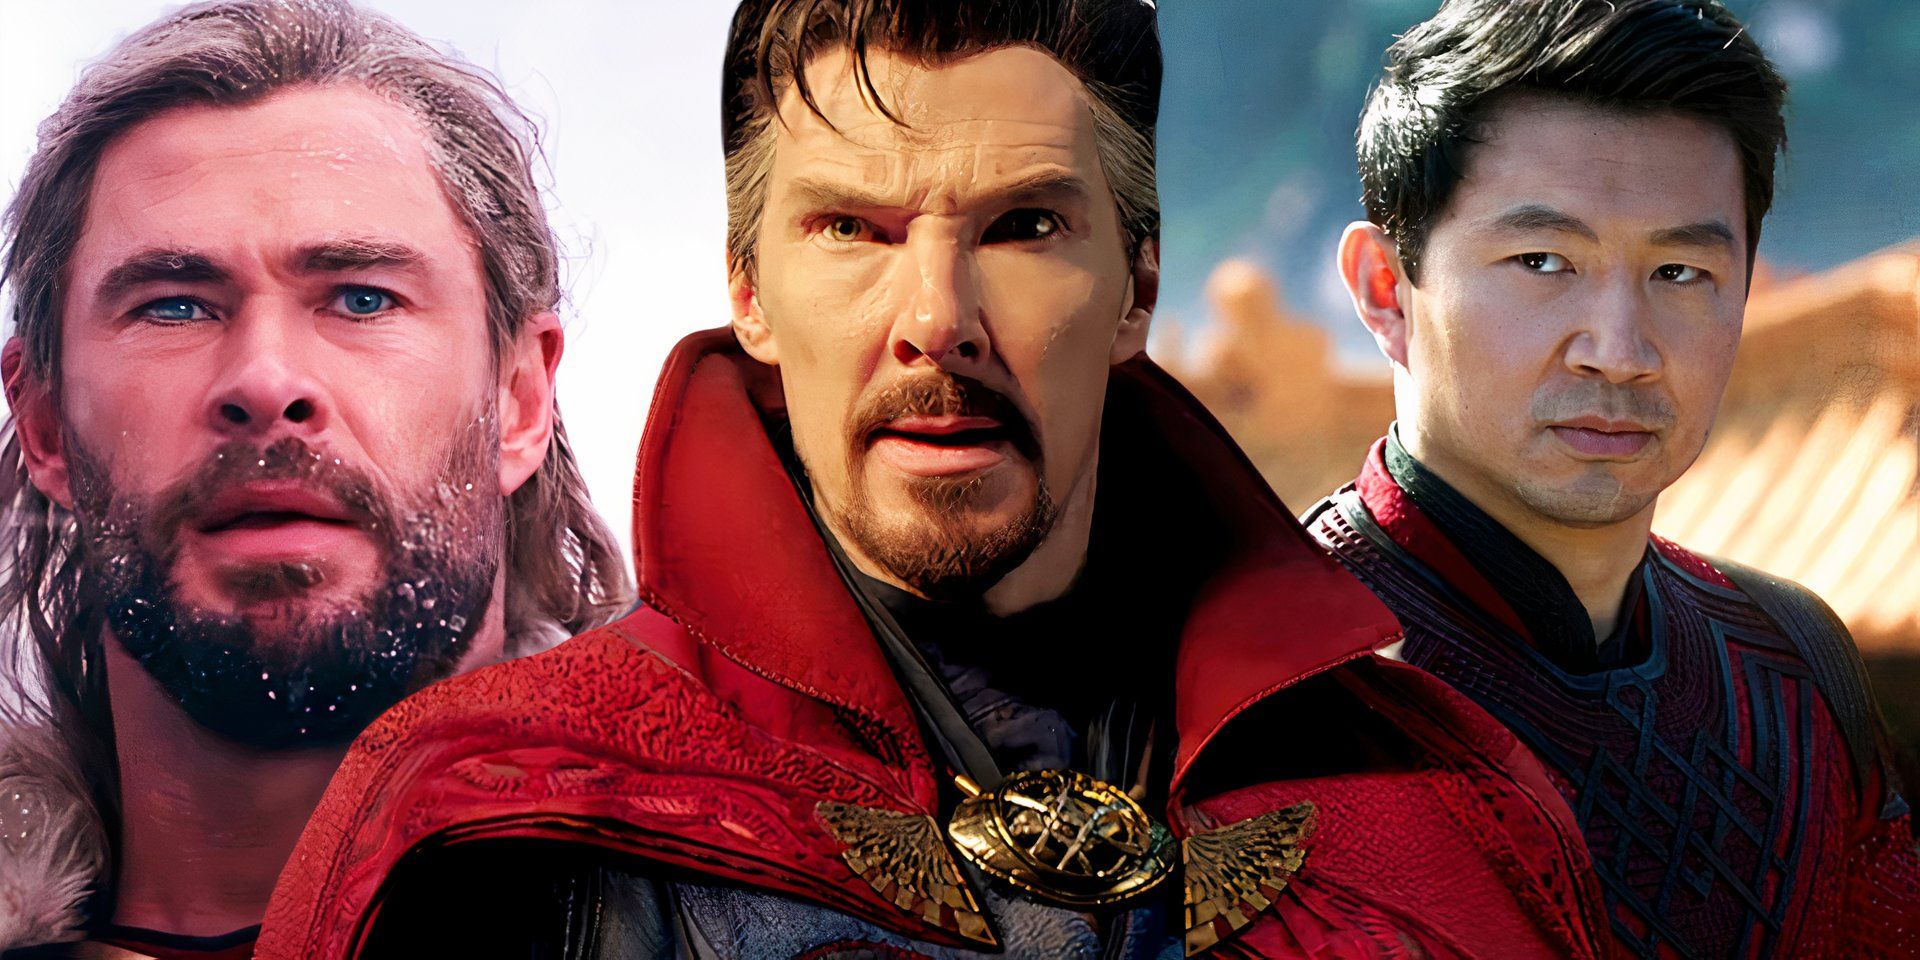 Chris Hemsworth looking scared as Thor, Benedict Cumberbatch looking angry as Doctor Strange, and Simu Liu looking stern as Shang-Chi